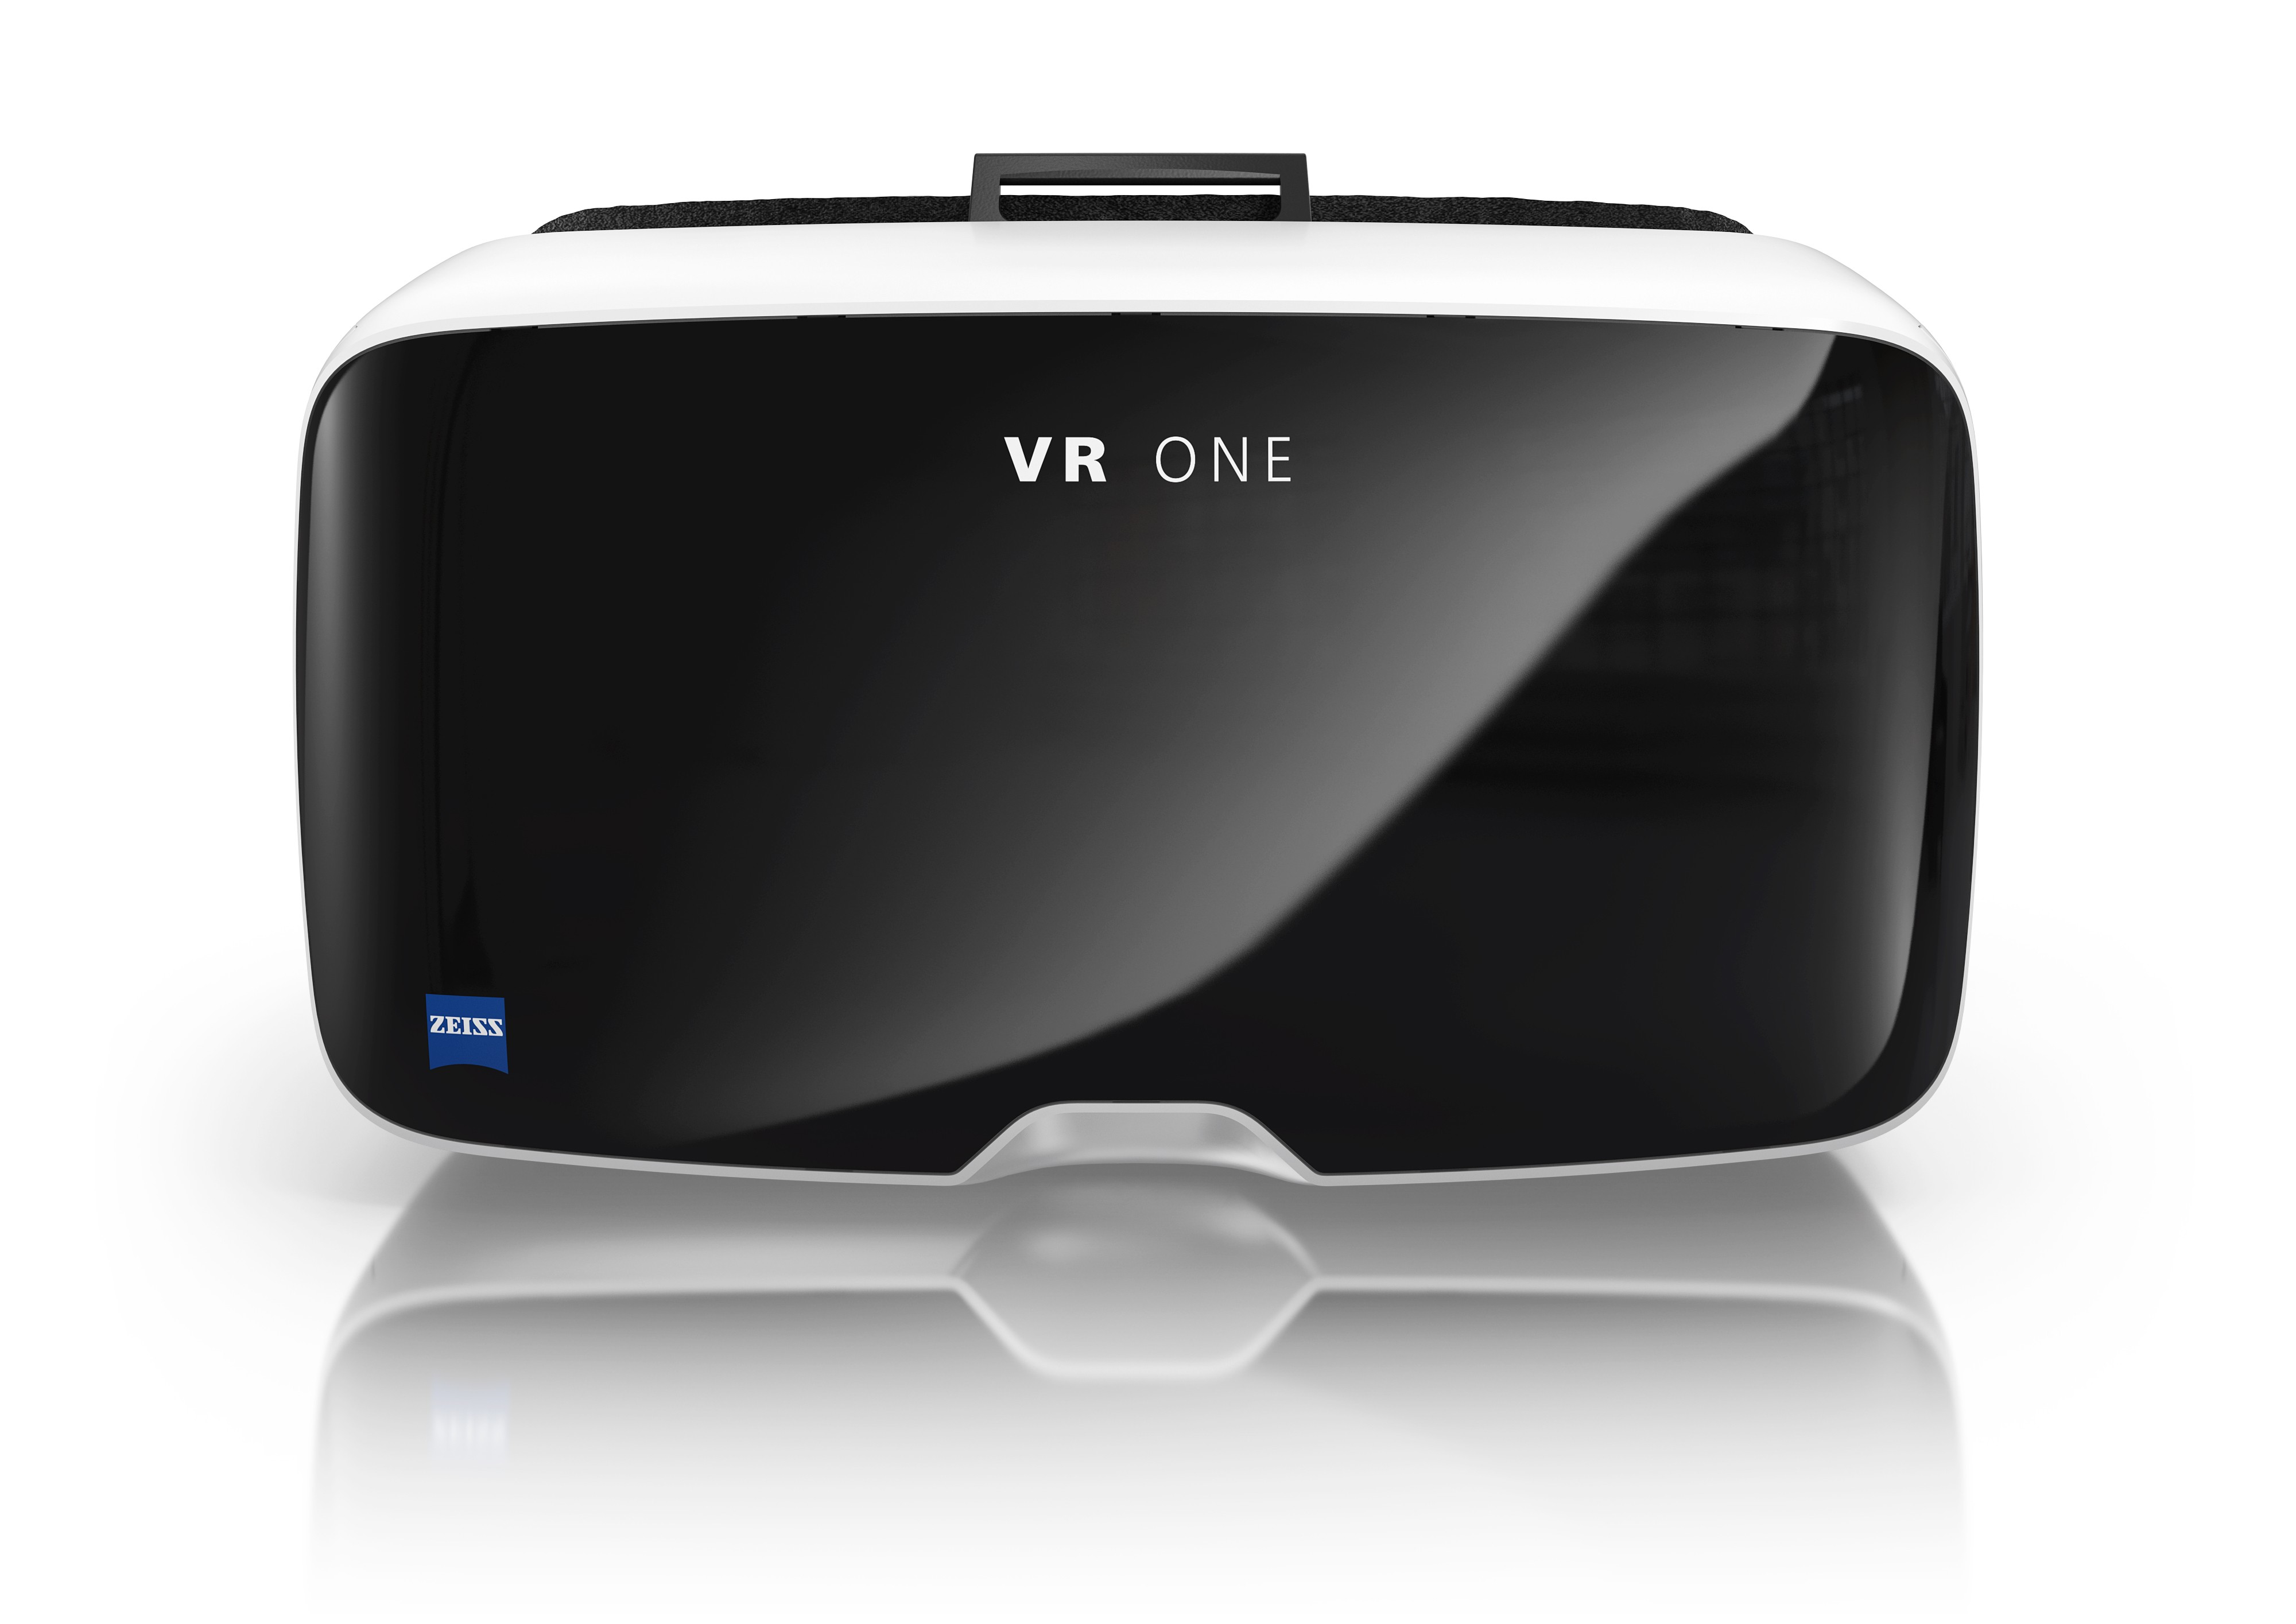 Carl Zeiss VR One Virtual Reality Headset